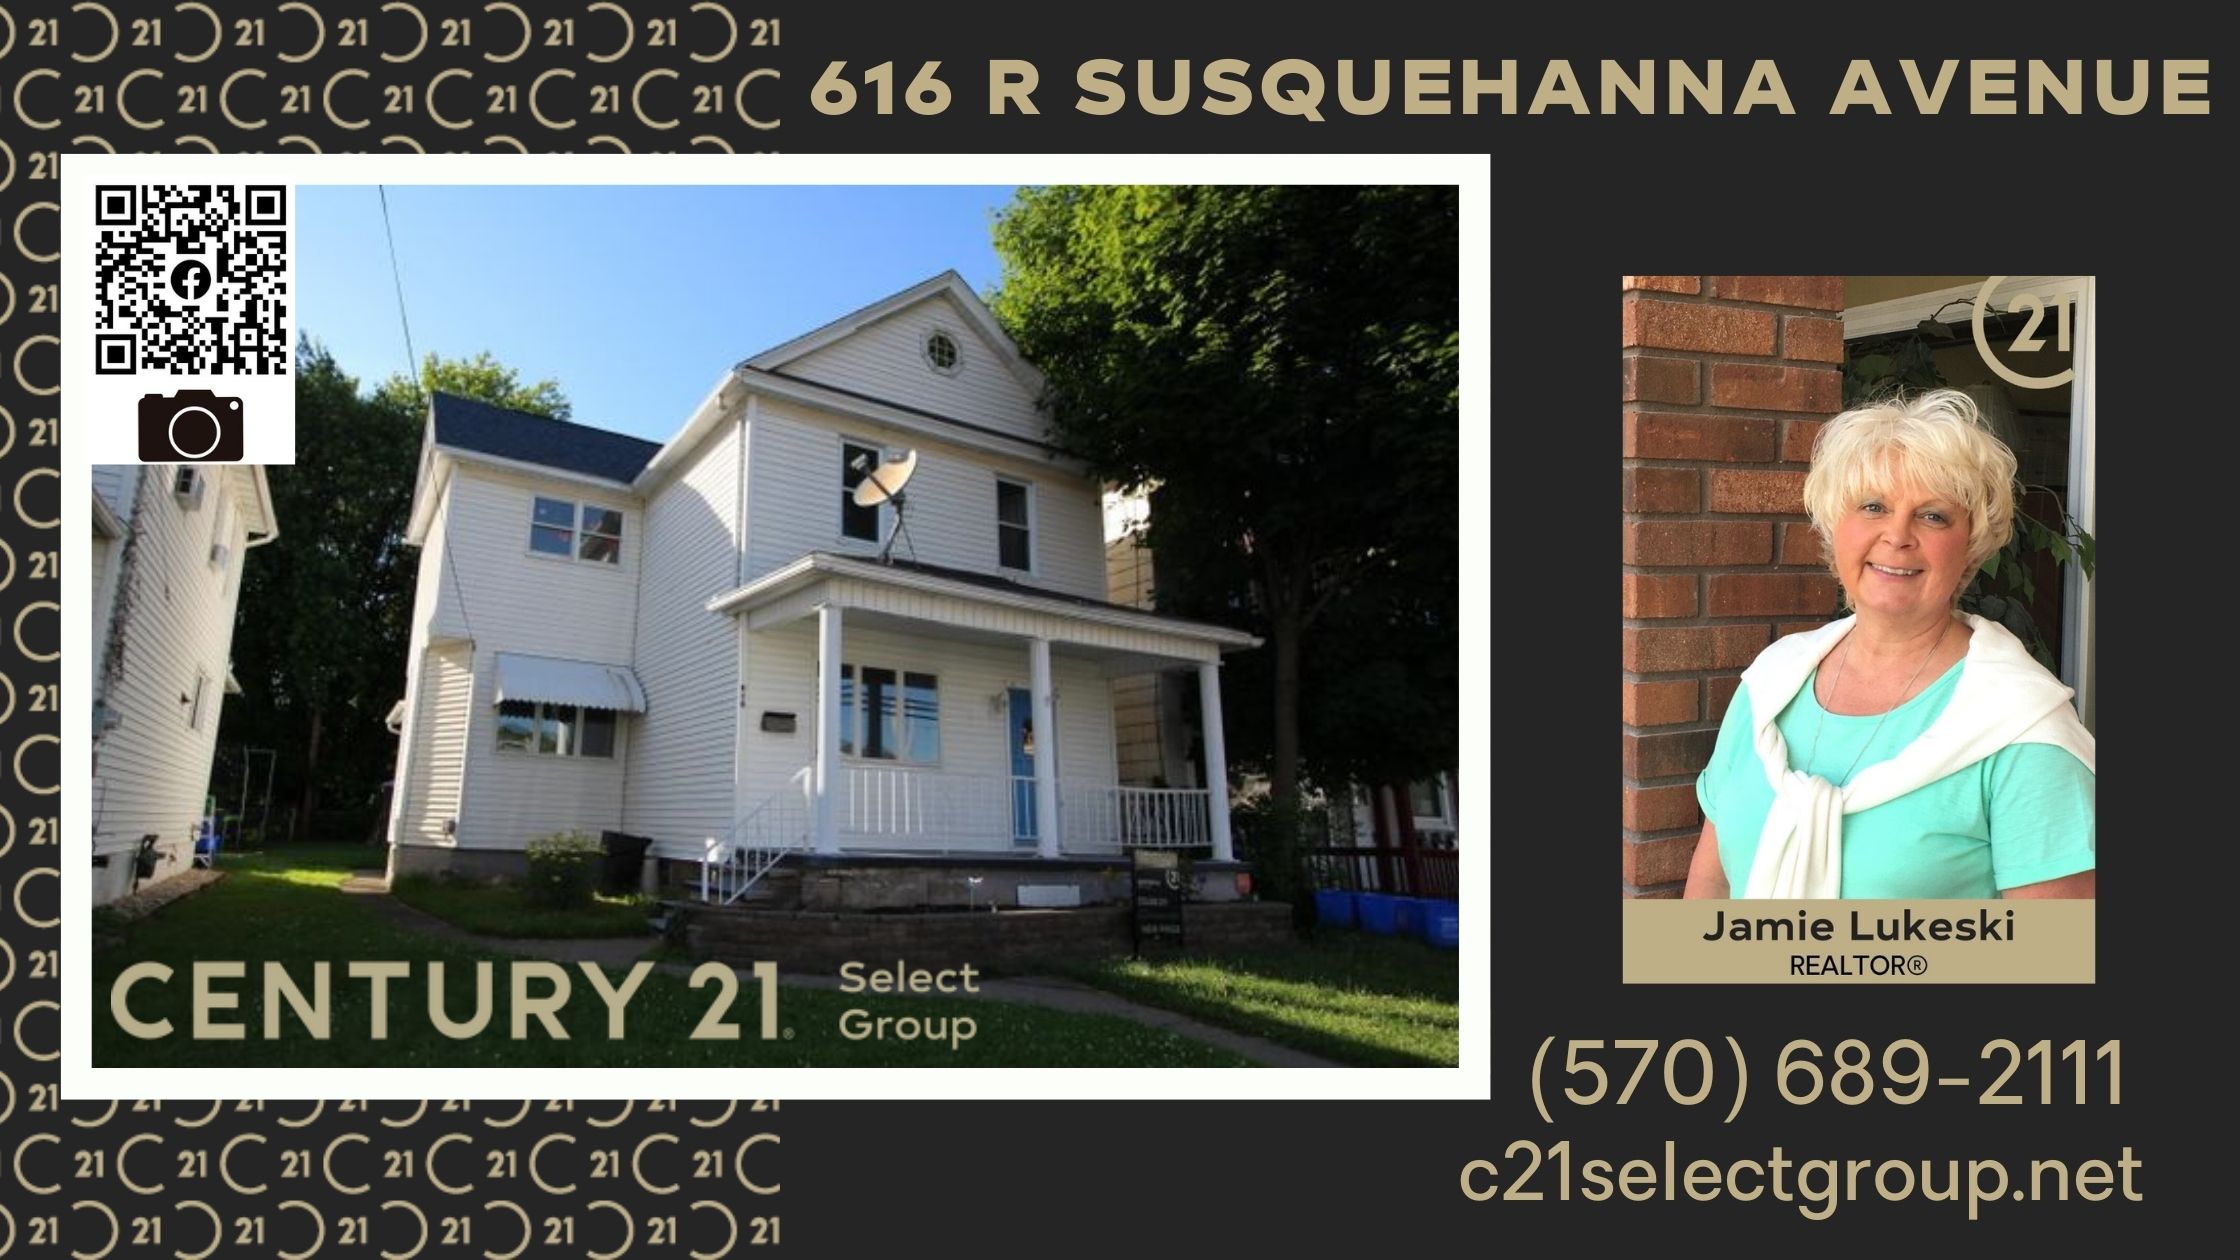 616 R Susquehanna Ave: Traditional Turn-Key Home in Olyphant